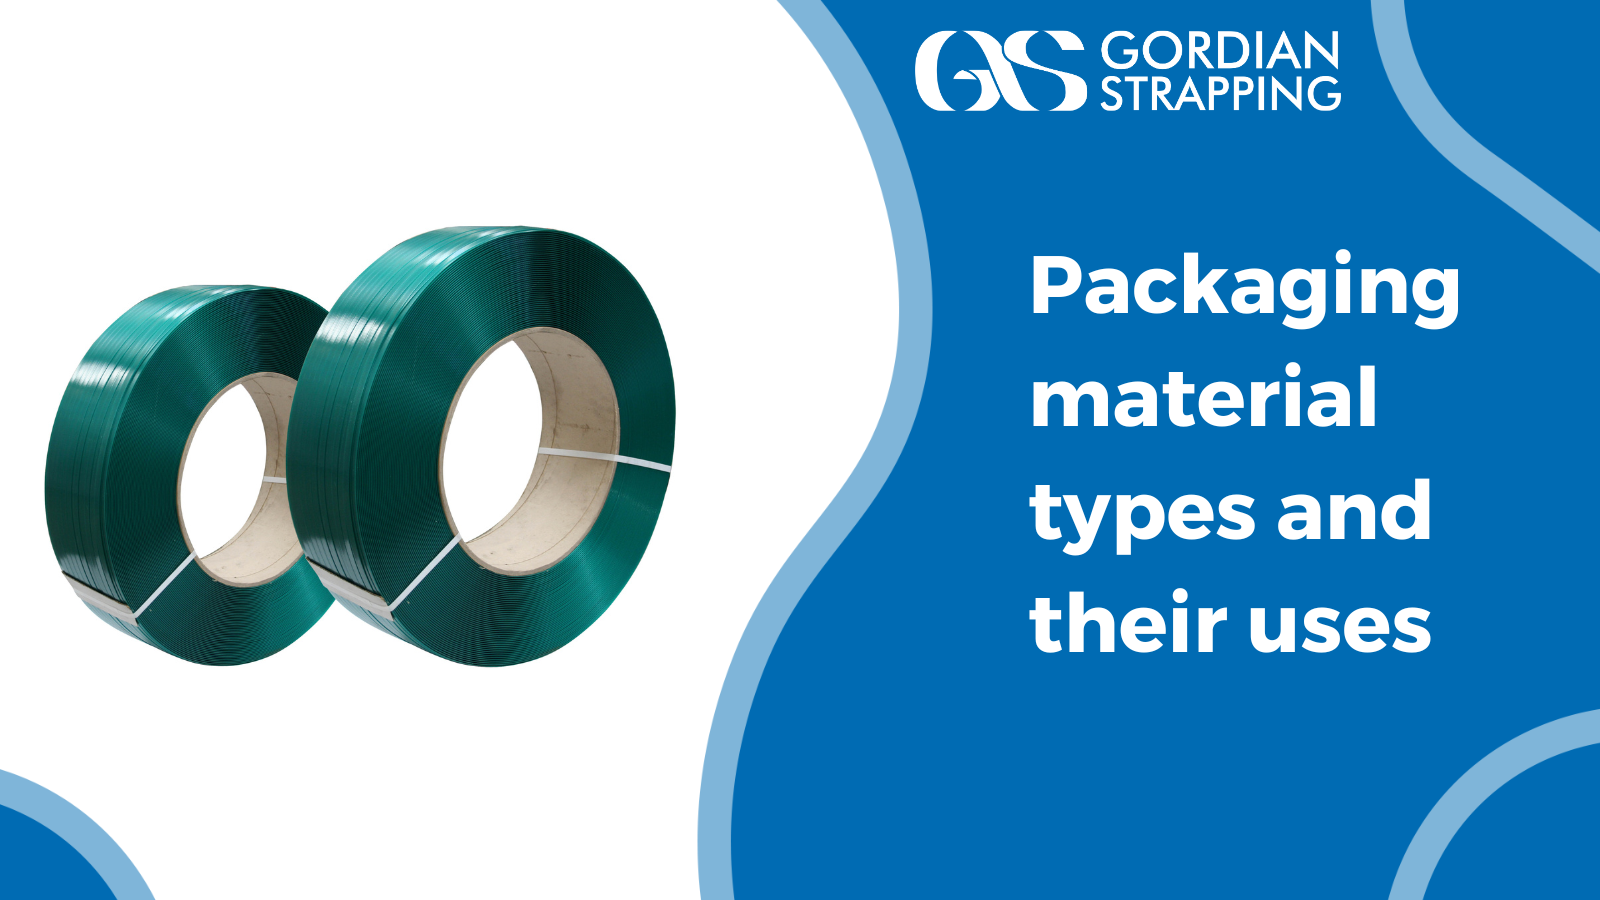 Everything you need to know about packaging material types and their uses